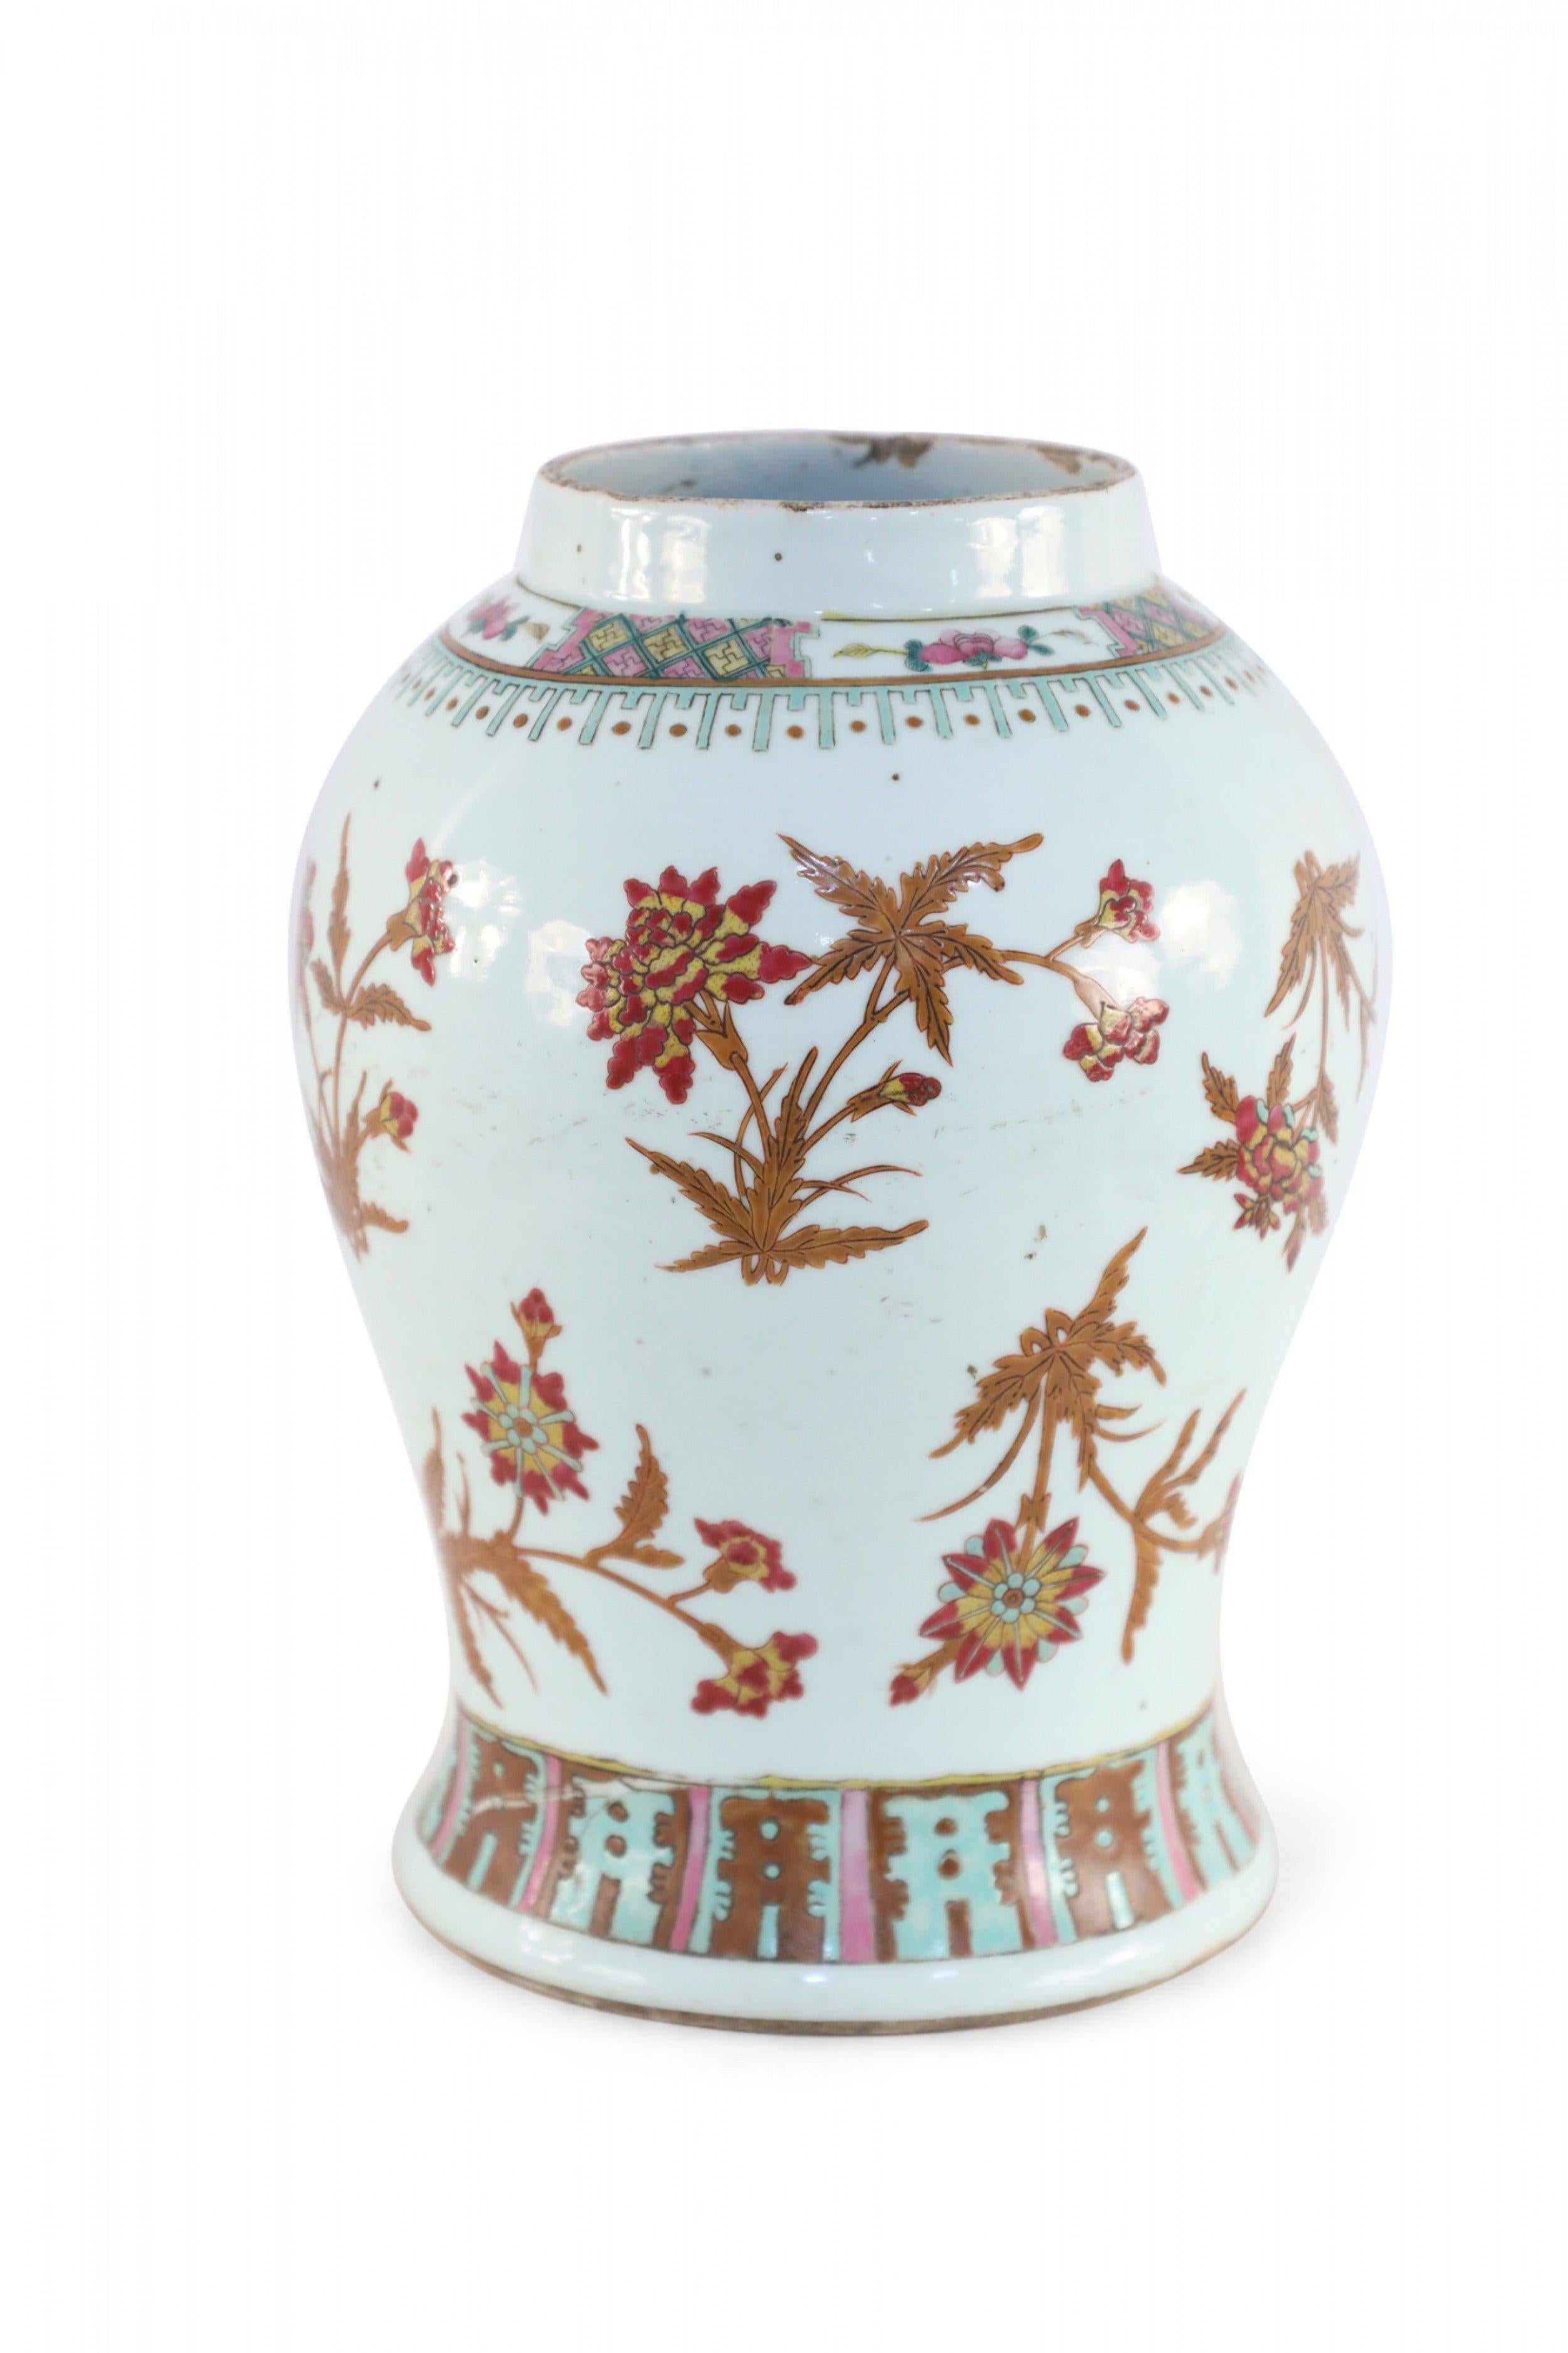 Chinese White, Brown, and Red Floral Design Porcelain Vase In Good Condition For Sale In New York, NY